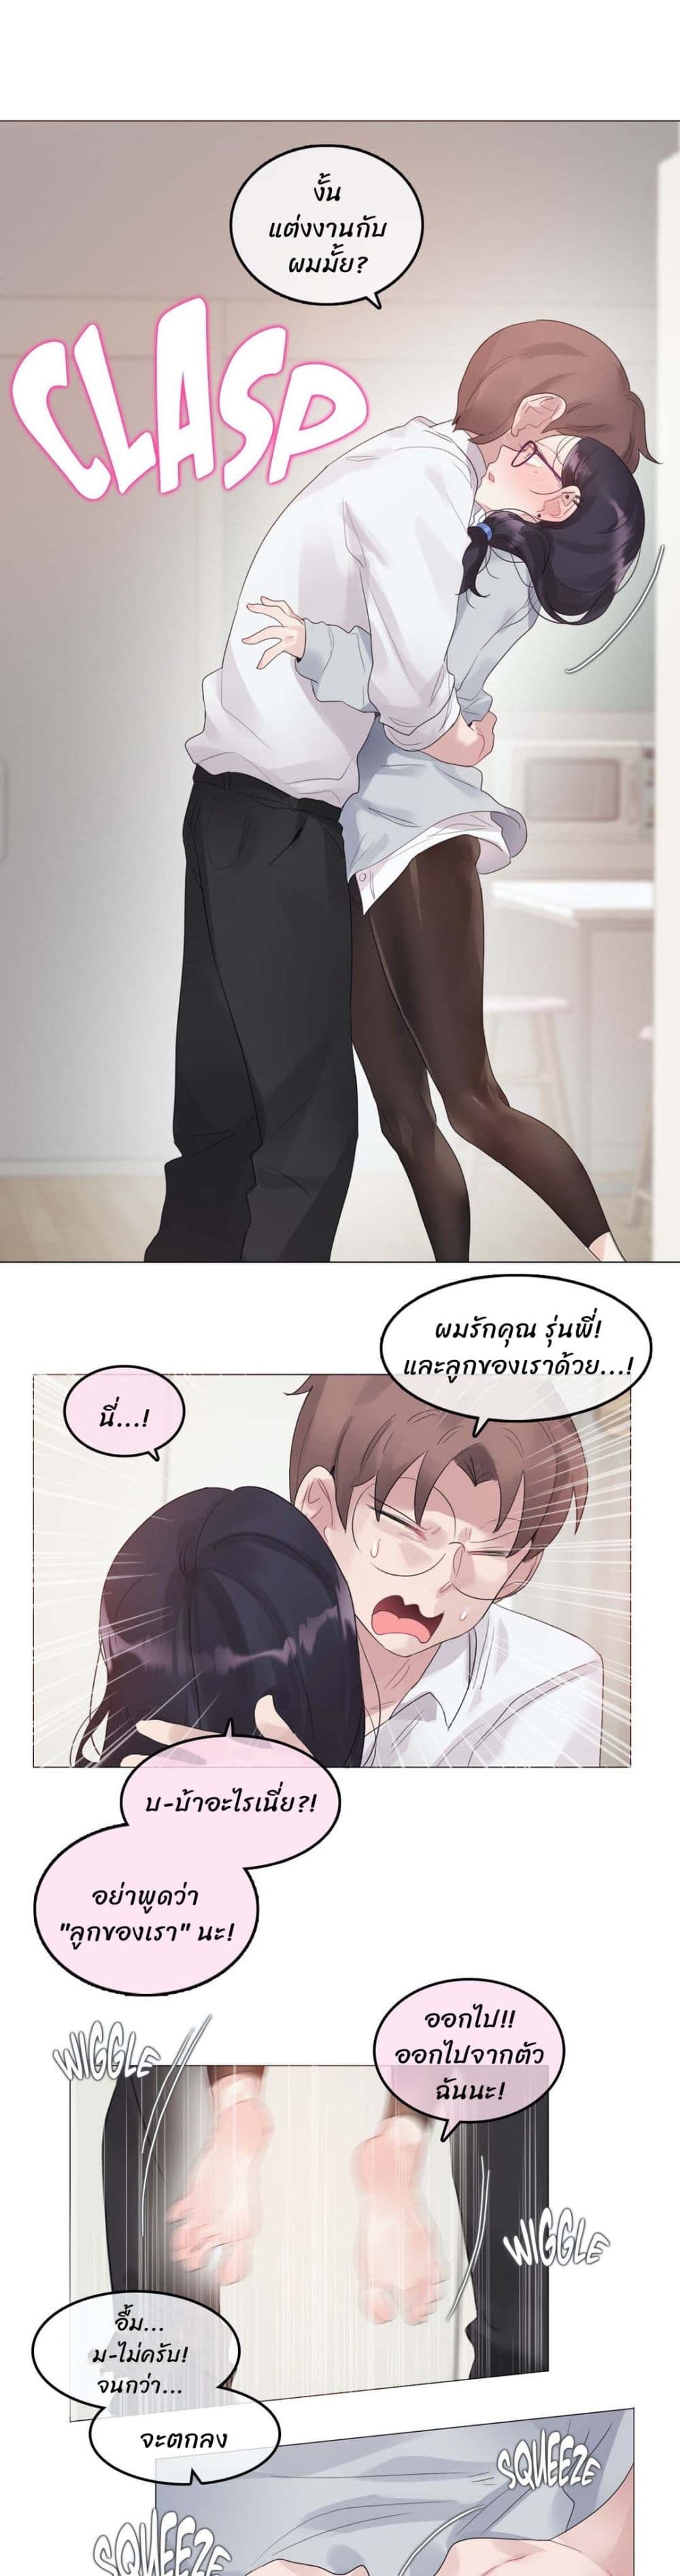 A Pervert's Daily Life 111-111